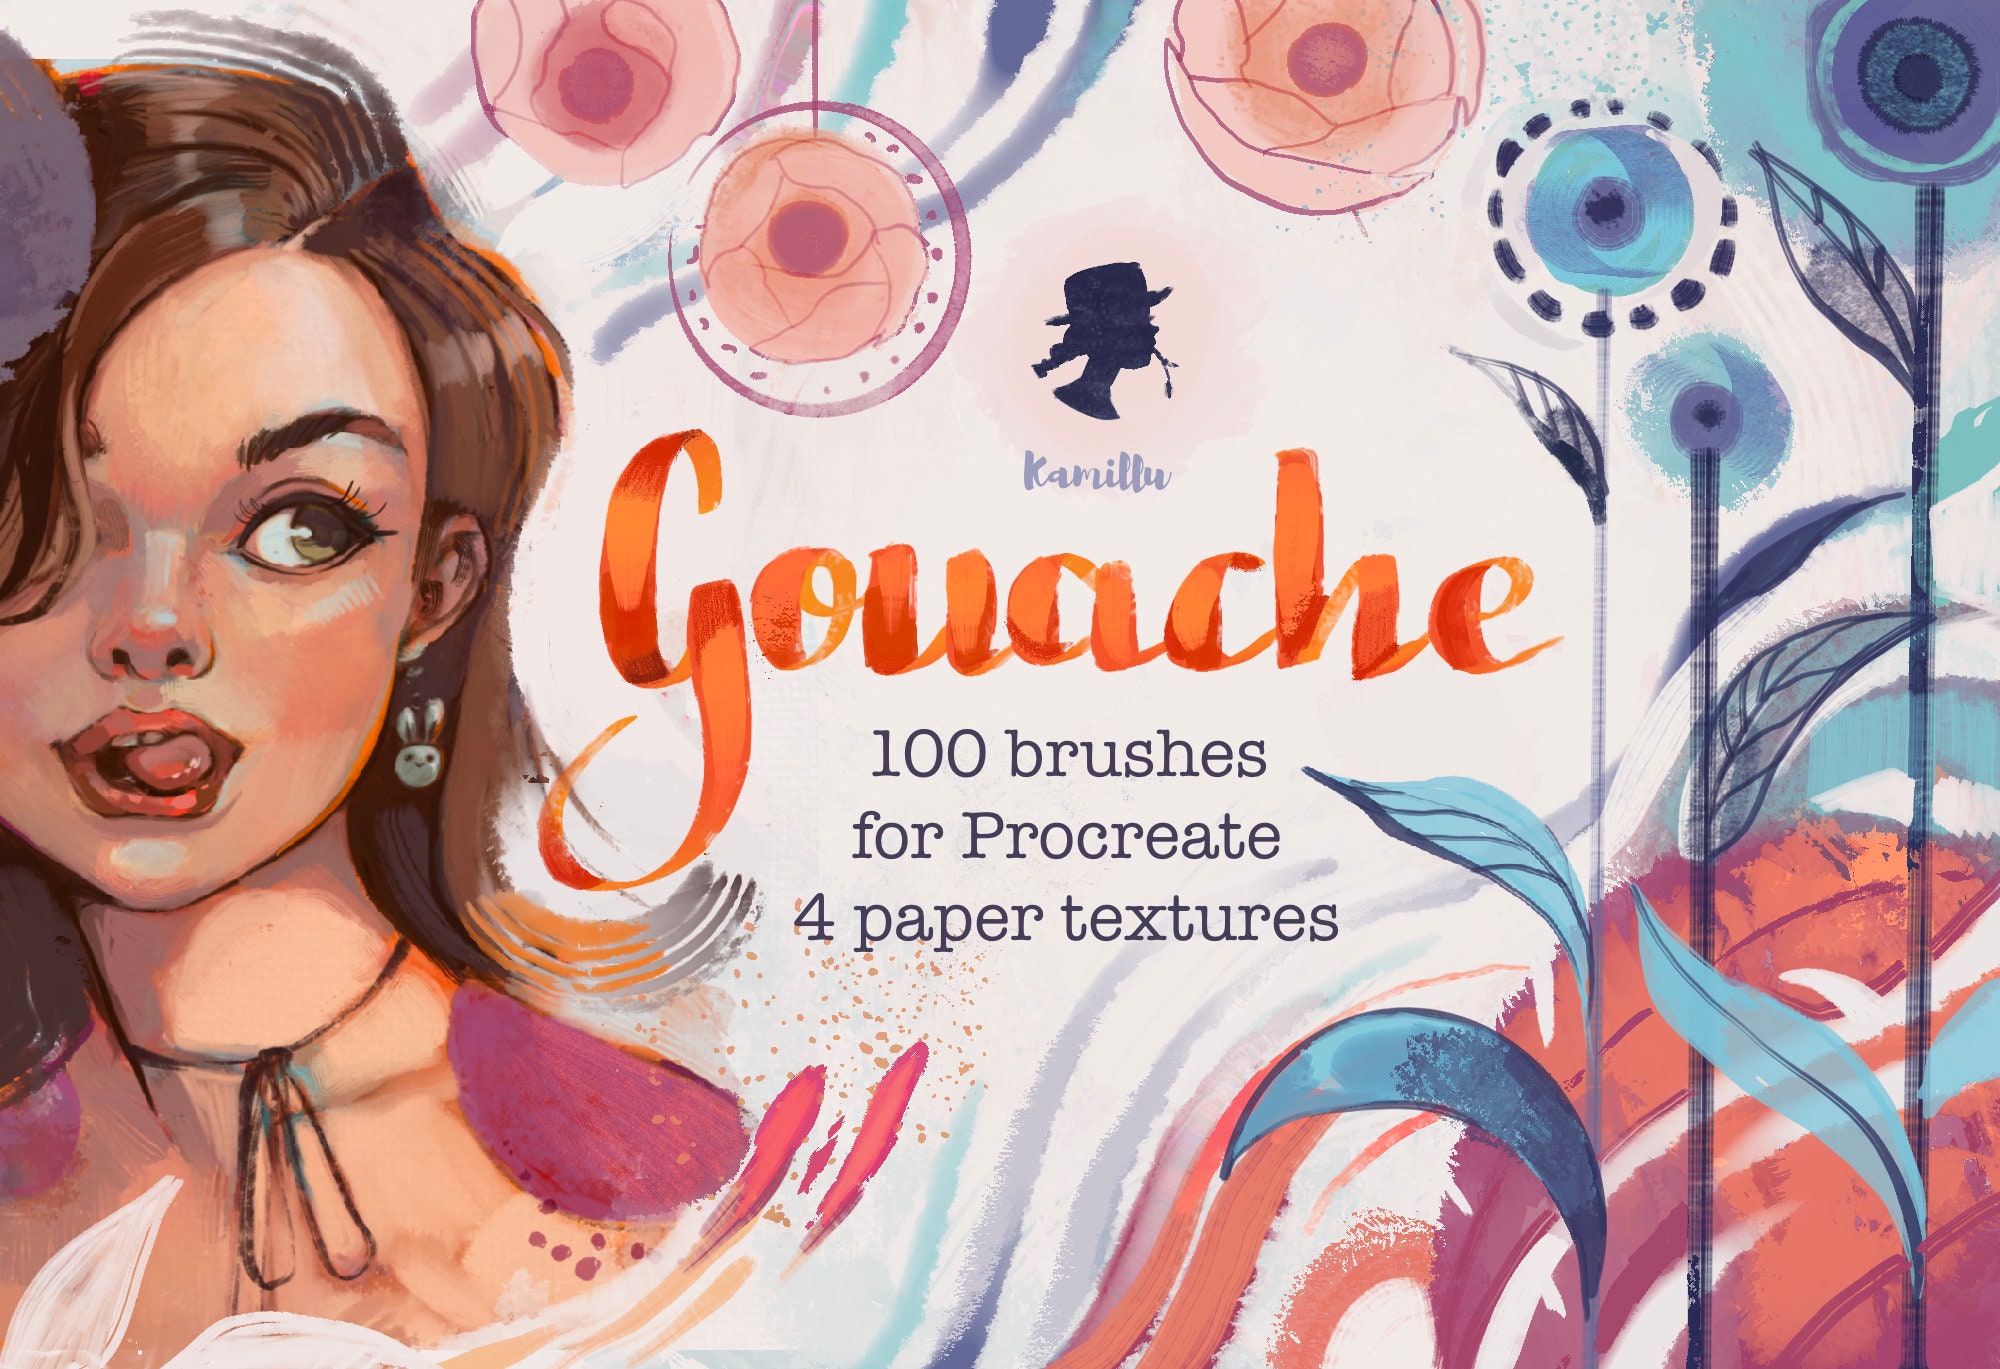 Free Gouache Brushes for Procreate!